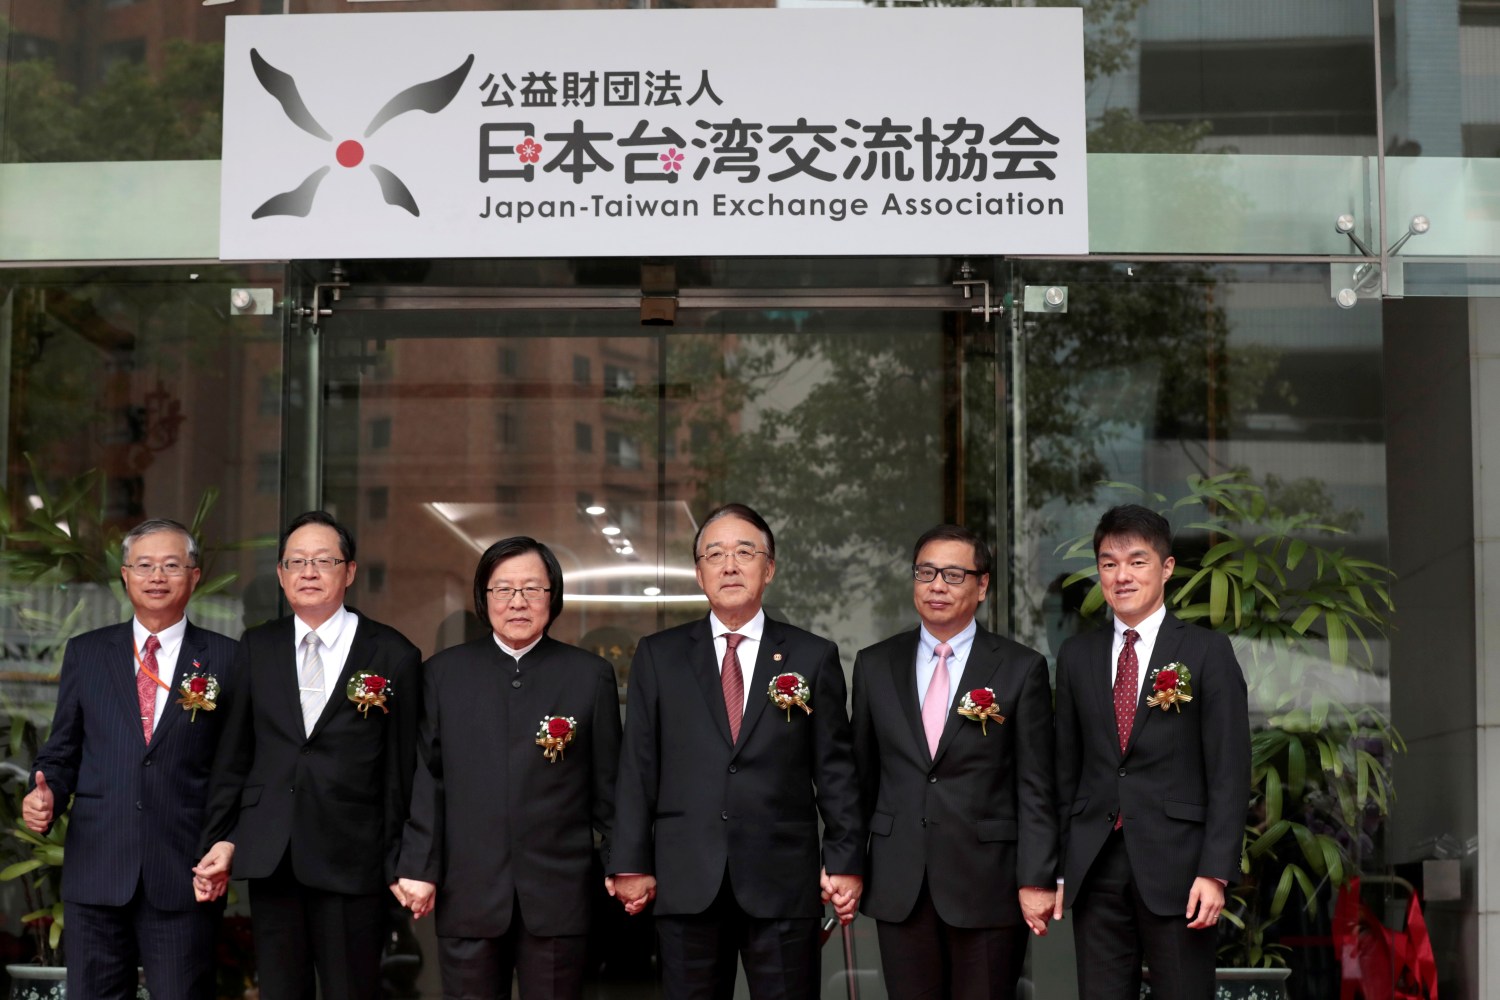 Association of East Asian Relations President Chiou I-jen (3rd-L) and Japanese Representative to Taiwan Mikio Numata (3rd-R) attend a name-changing ceremony of the Japan's de facto embassy from "The Interchange Association, Japan" to "Japan-Taiwan Exchange Association"